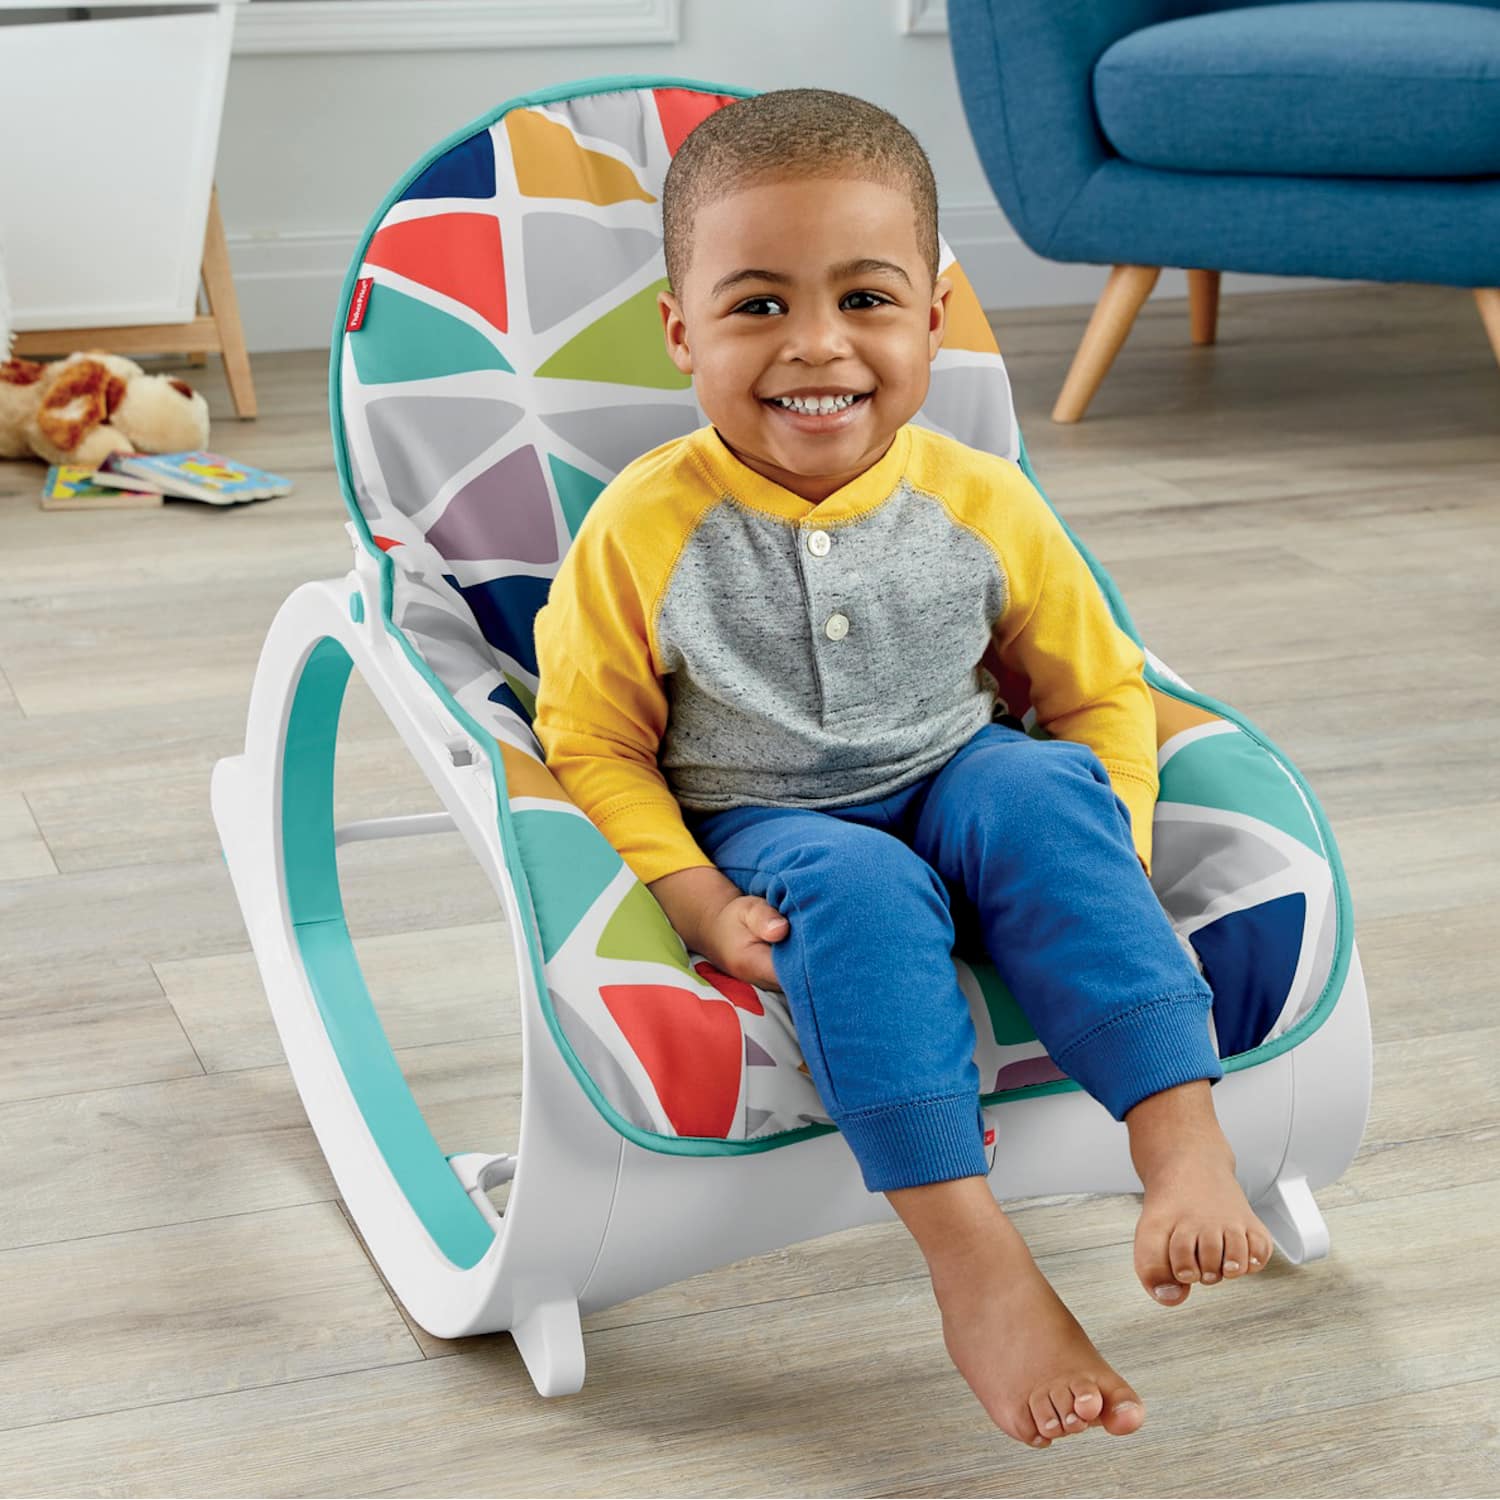 instructions for fisher price infant to toddler rocker